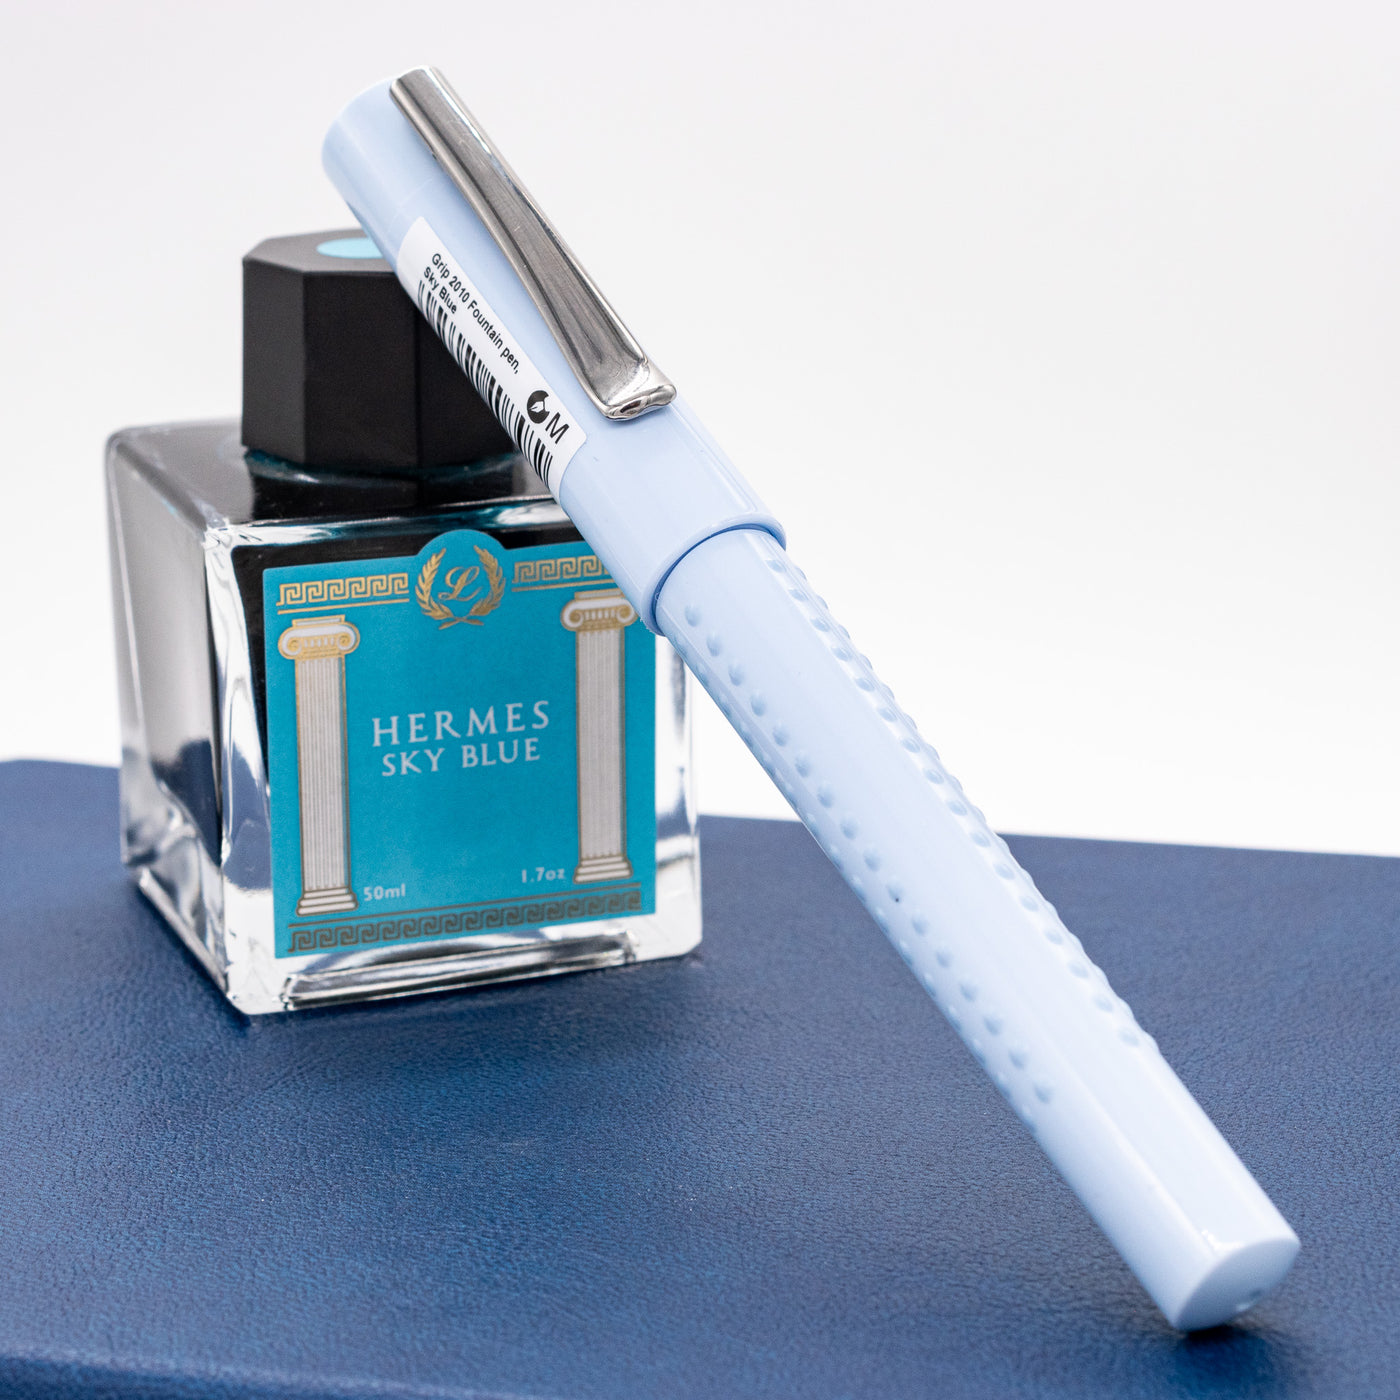 Faber-Castell Grip 2010 Harmony Fountain Pen - Sky Blue capped